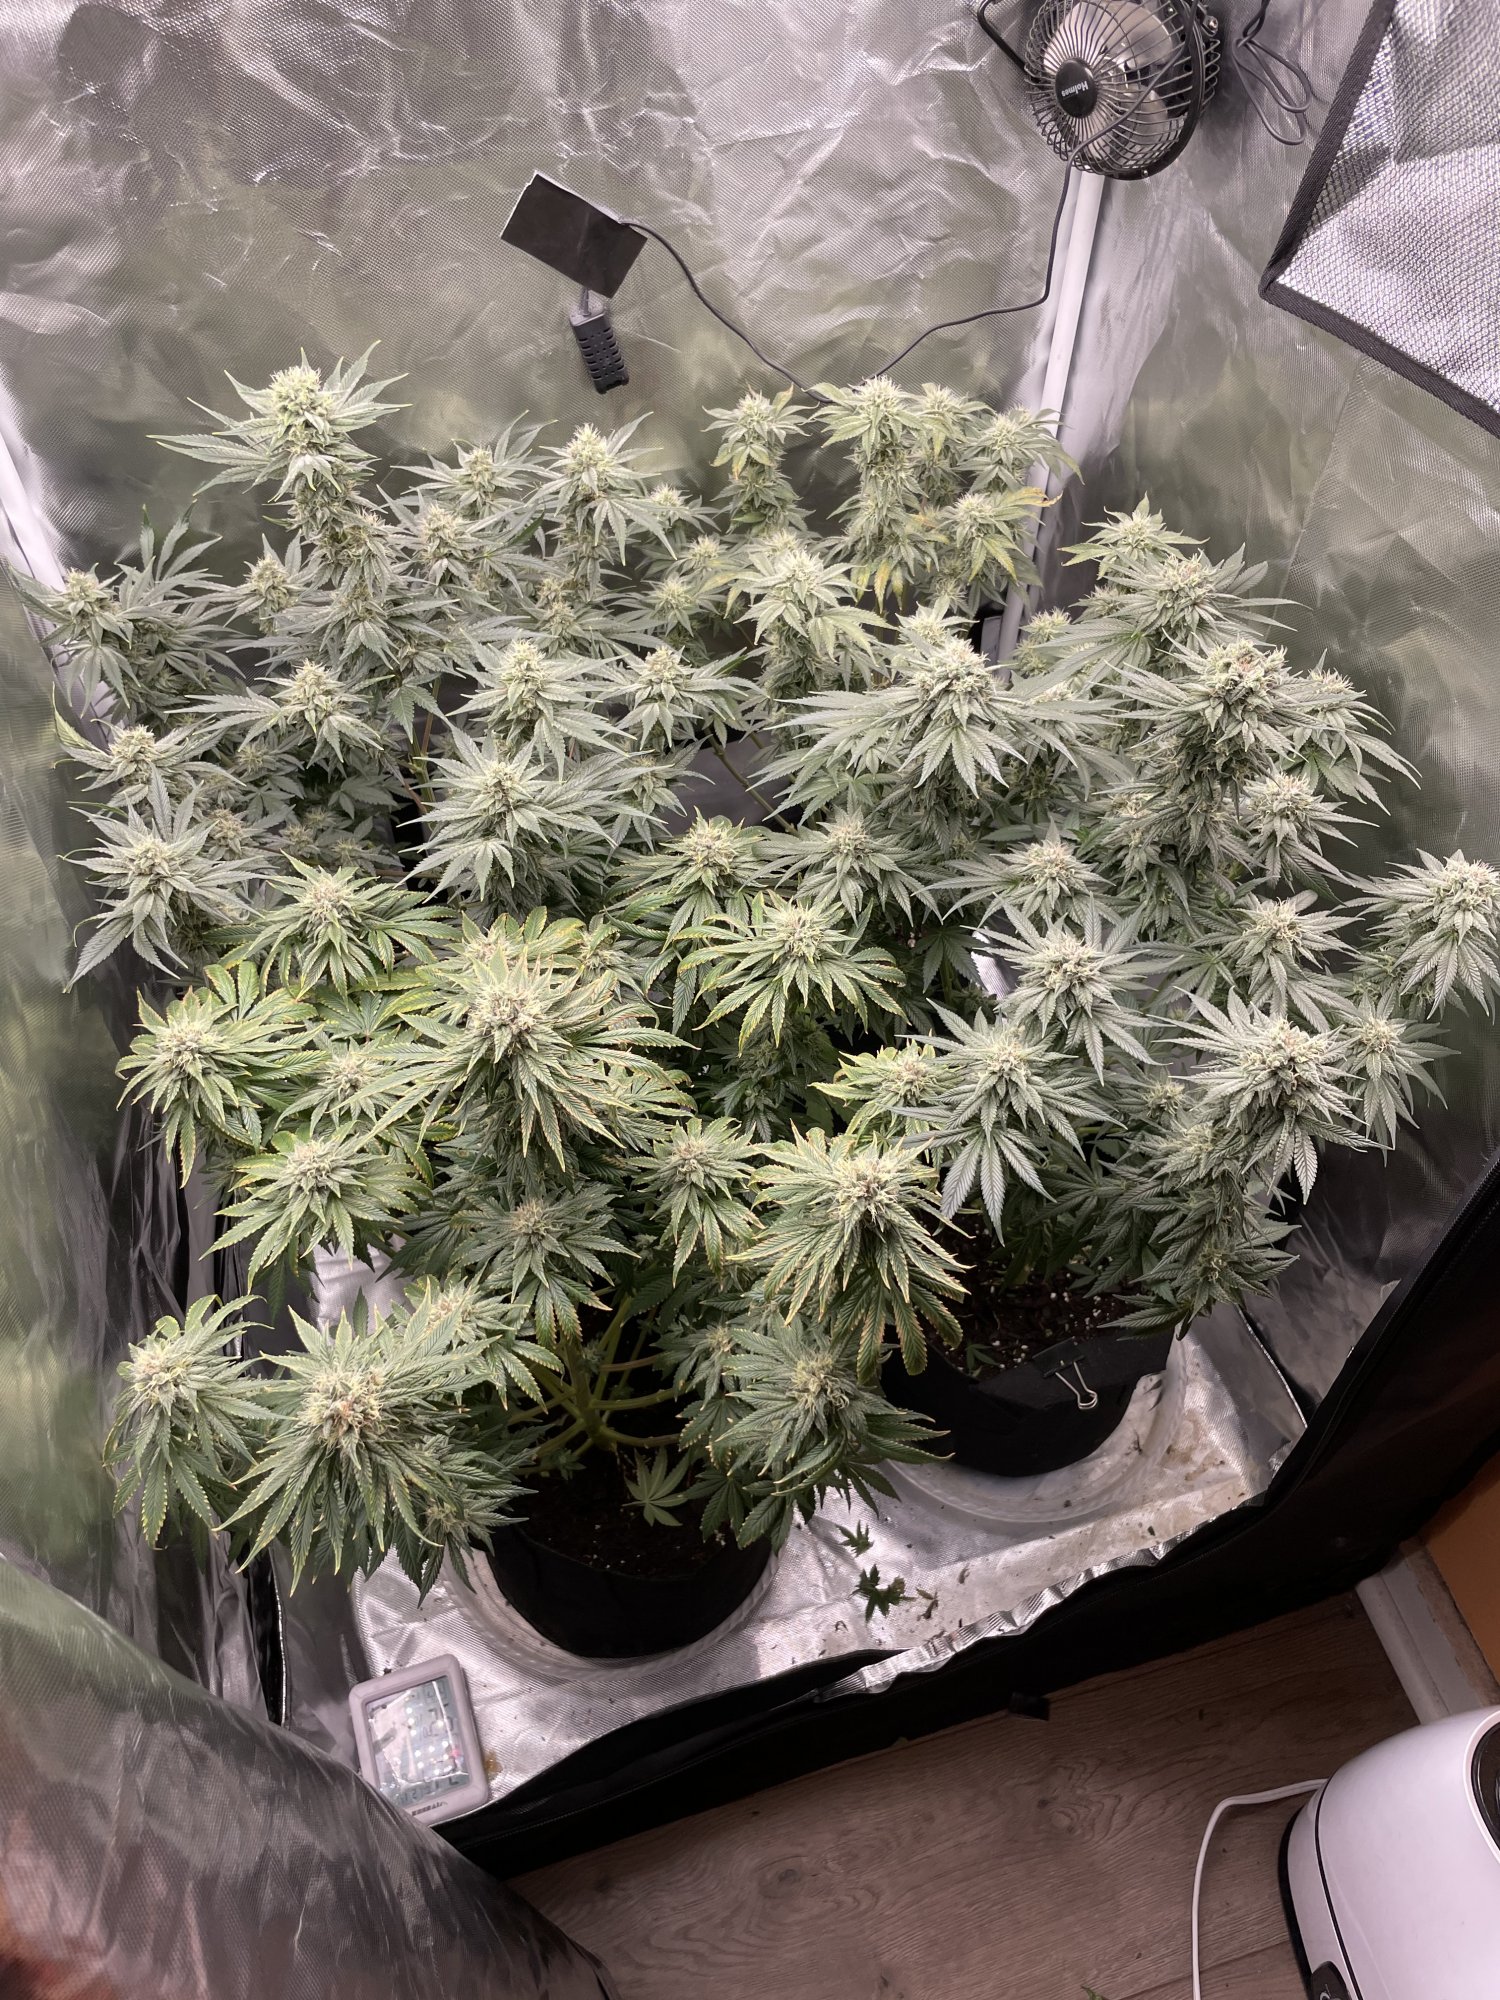 Harvest in two weeks first grow 3